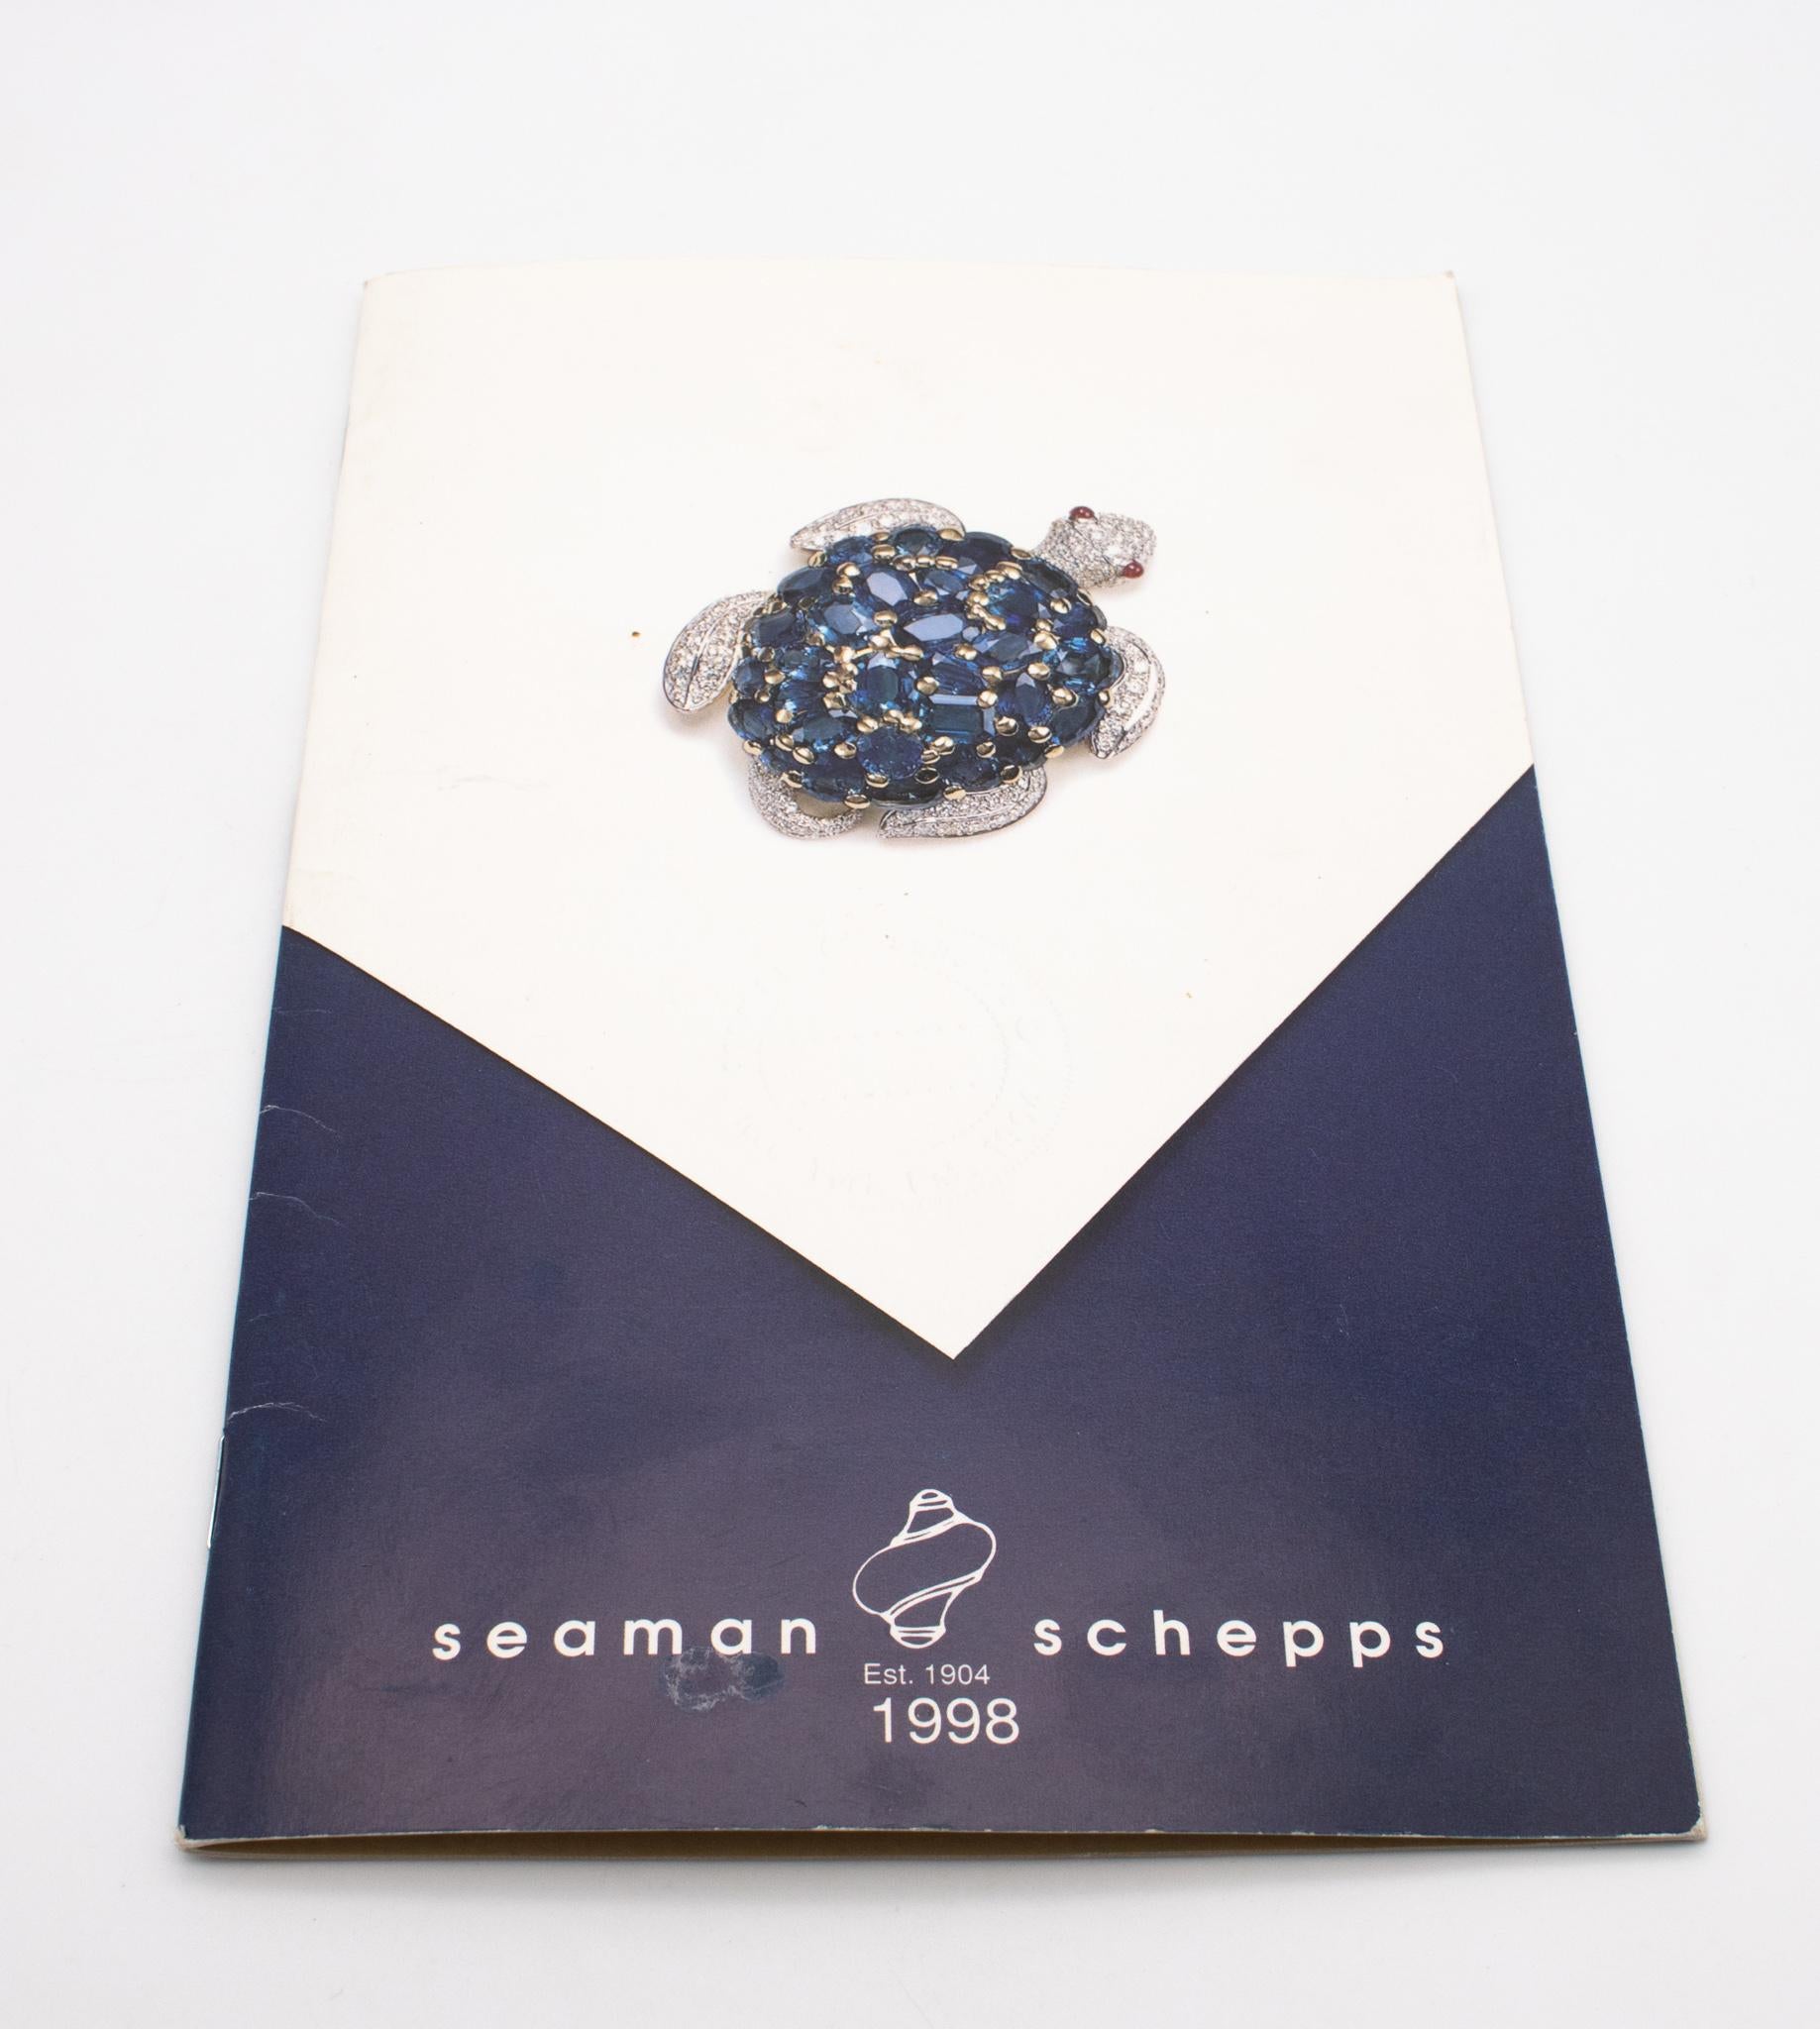 Jeweled brooch-pendant designed by Seaman Schepps.

An elegant and sophisticate organic pendant-brooch created in New York city by the American jewelers Seaman Schepps, back in the 1998. This large jewelry piece was carefully crafted with impeccable